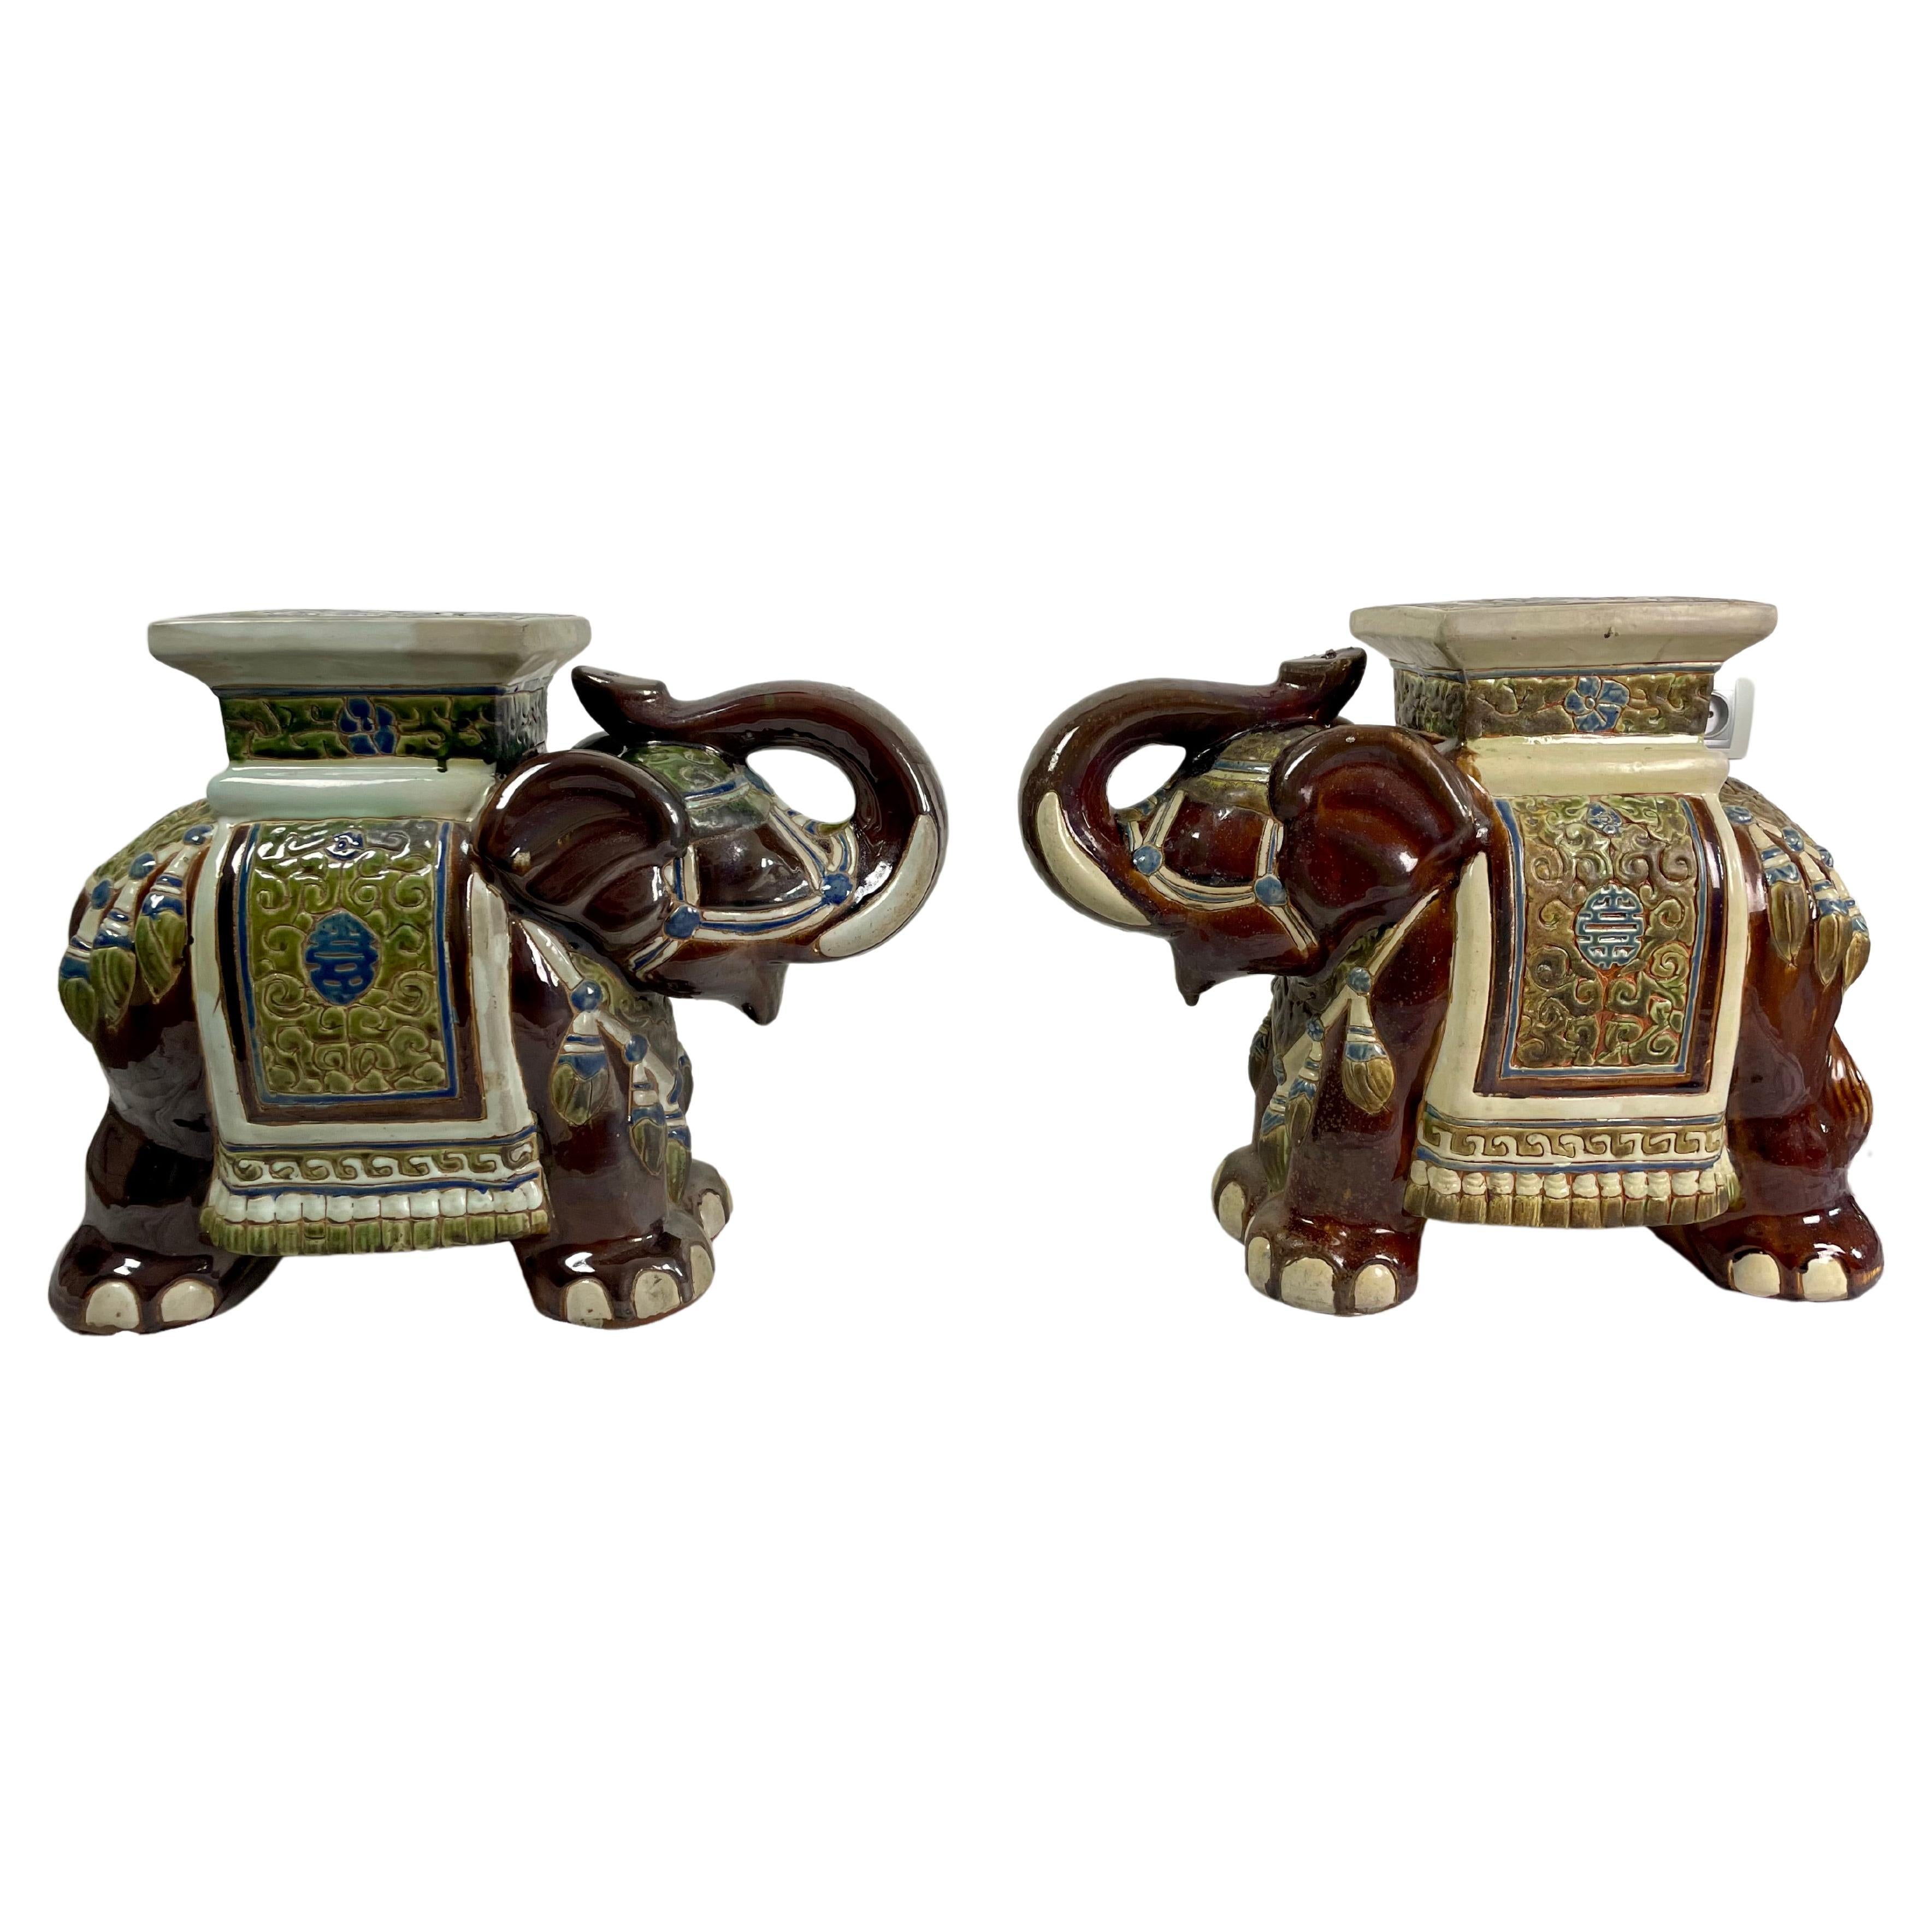 Pretty pair of very decorative garden stools or plant stands or side tables in the shape of Asian elephants.
Hand painted ceramic.
The elephants are in ceremonial dress, the costume patterns are delicate and reminiscent of Asia and the Silk